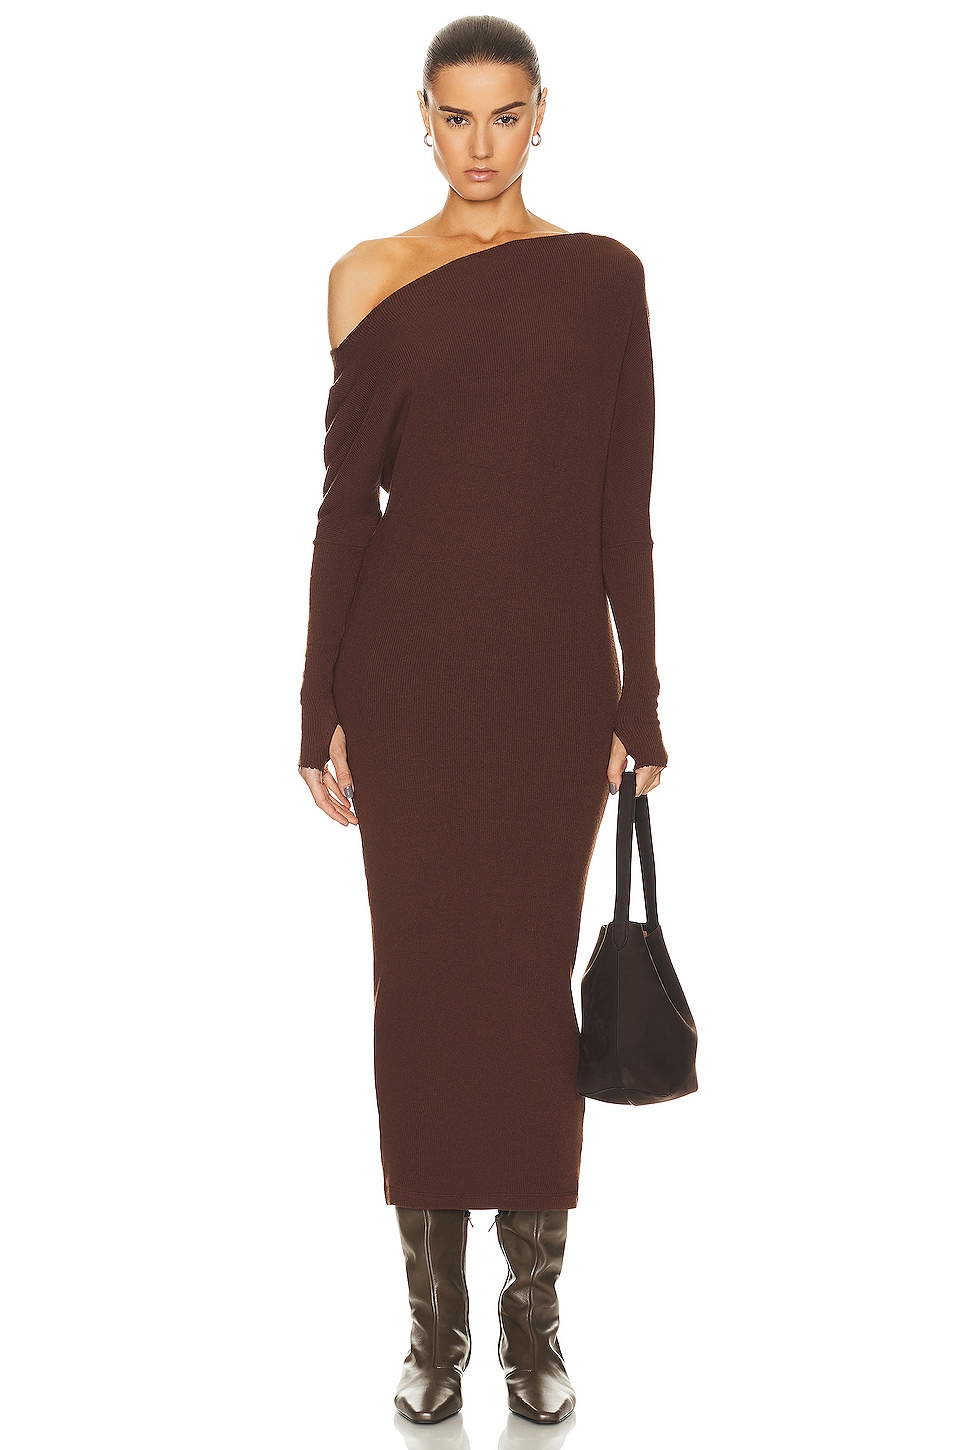 Image 1 of Enza Costa Knit Slouch Dress in Saddle Brown